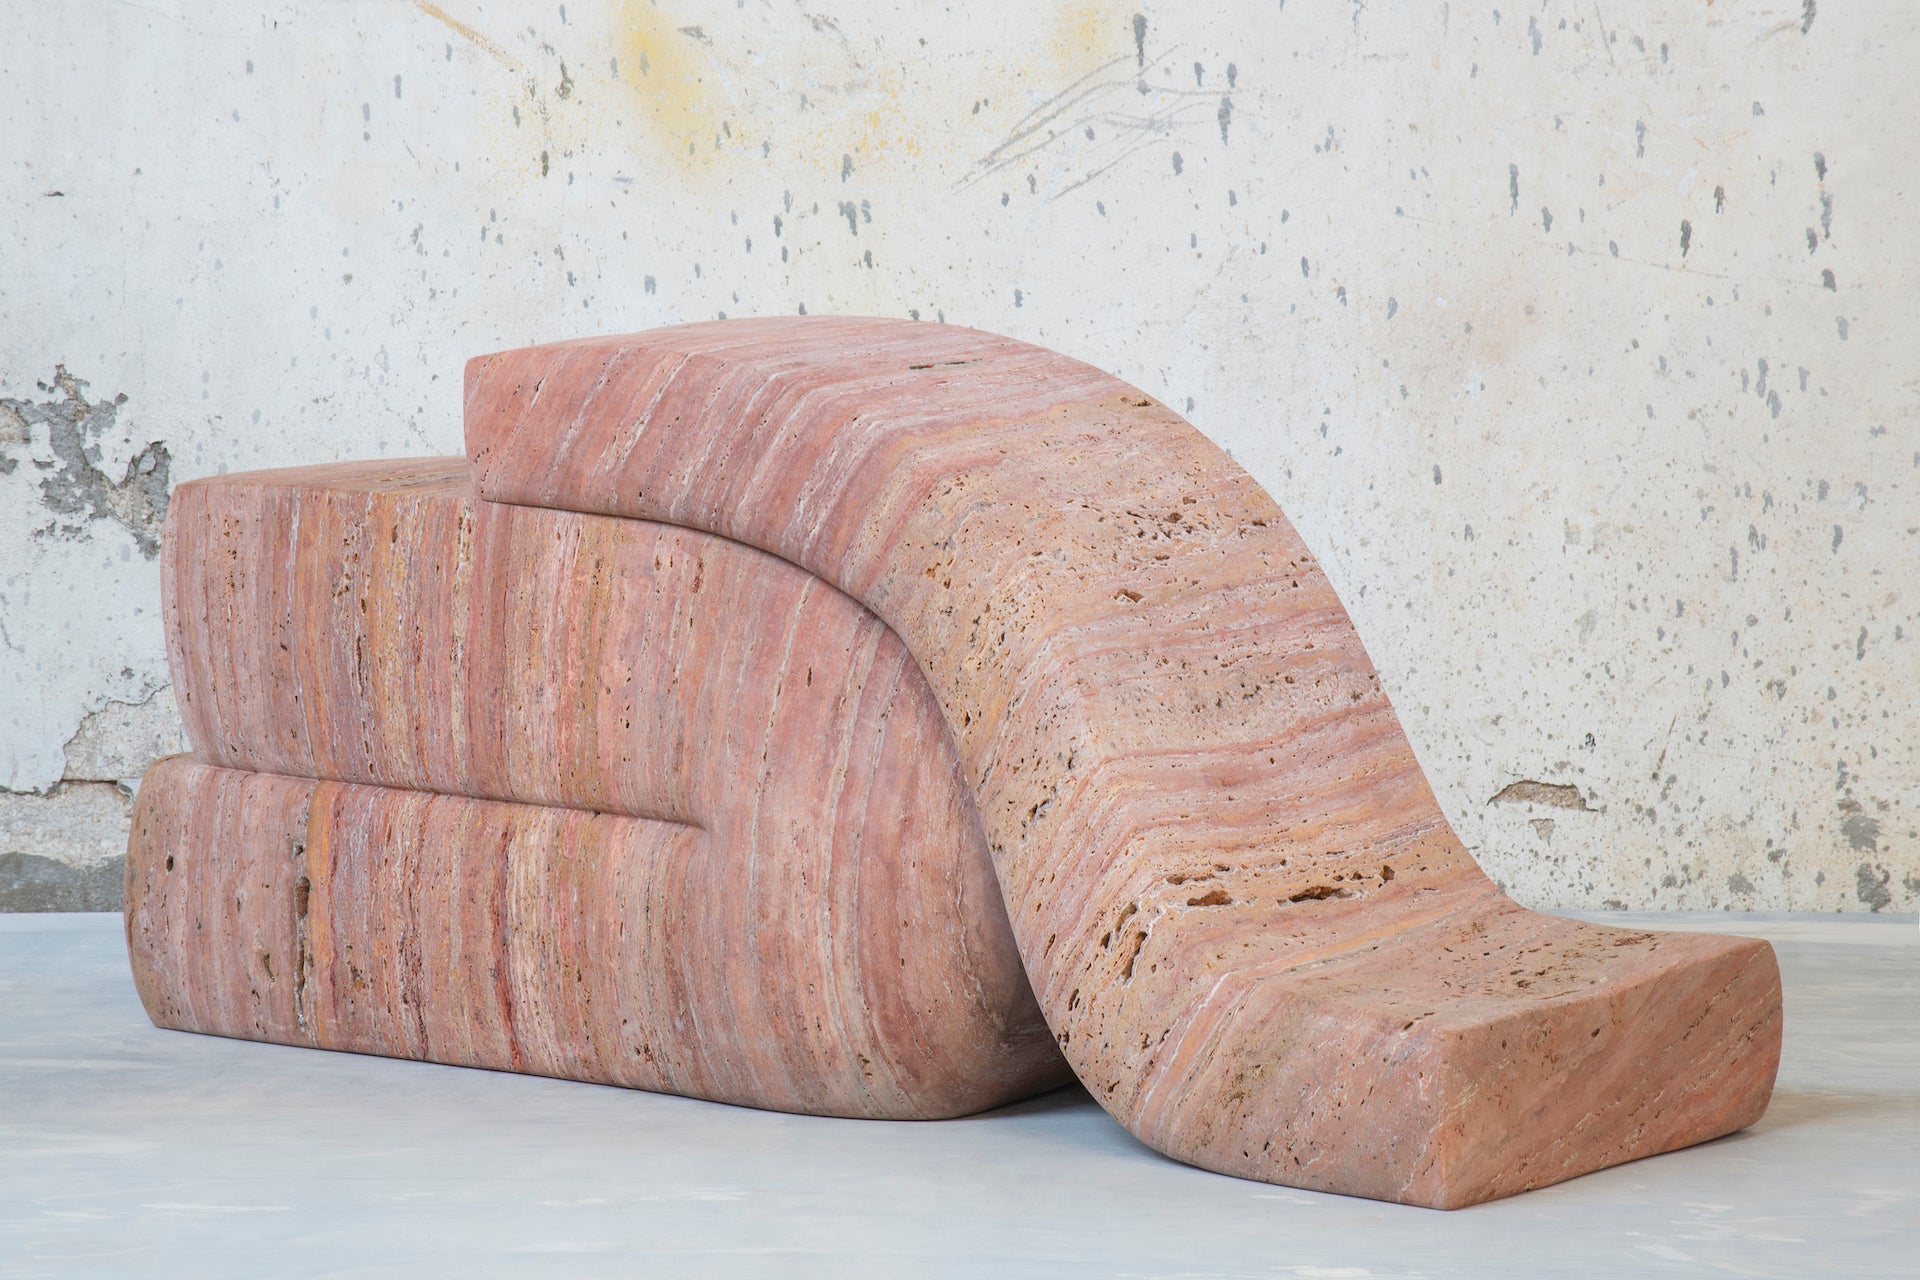 Represented by Friedman Benda: Seduction Pair 06 by Najla El Zein, 2018, made of Iranian red travertine. Acquired by the St Louis Art Museum. Photo © Damien Arlettaz; courtesy of Friedman Benda and the artist